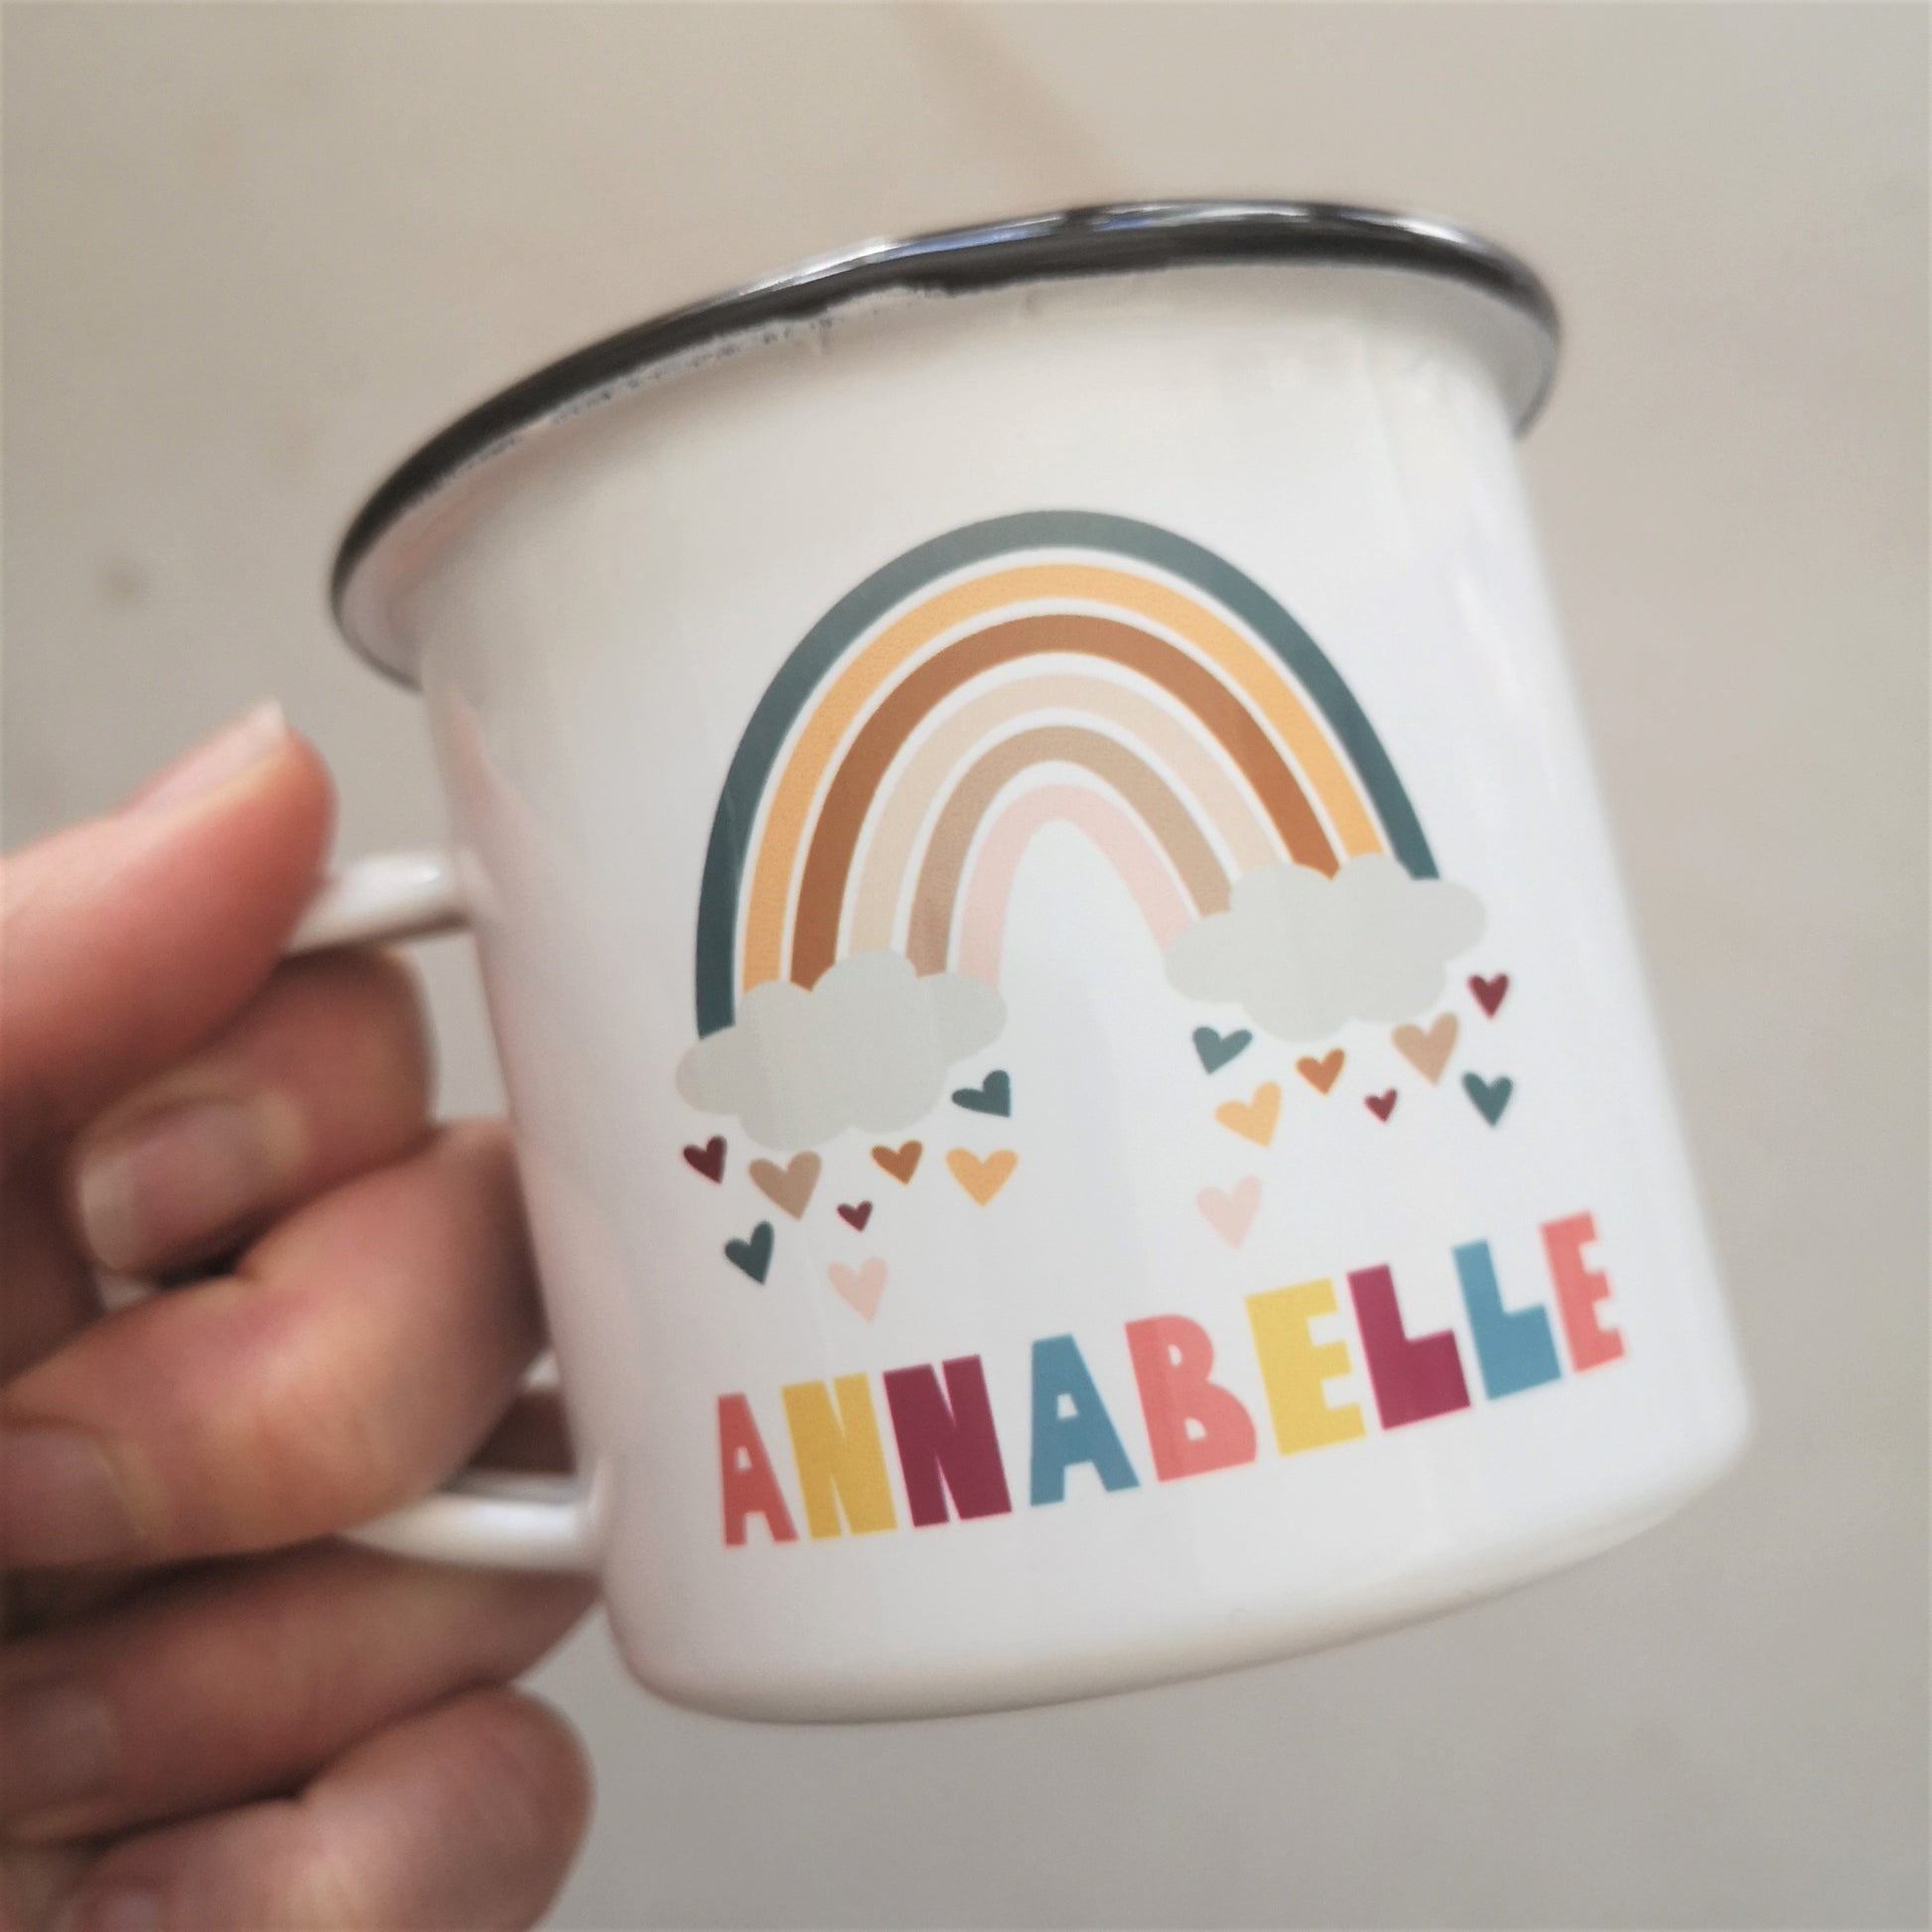 Another angle of a white enamel mug with a cute colourful rainbow on it with hearts just below the clouds, and below the space to add your favourite little one's name.